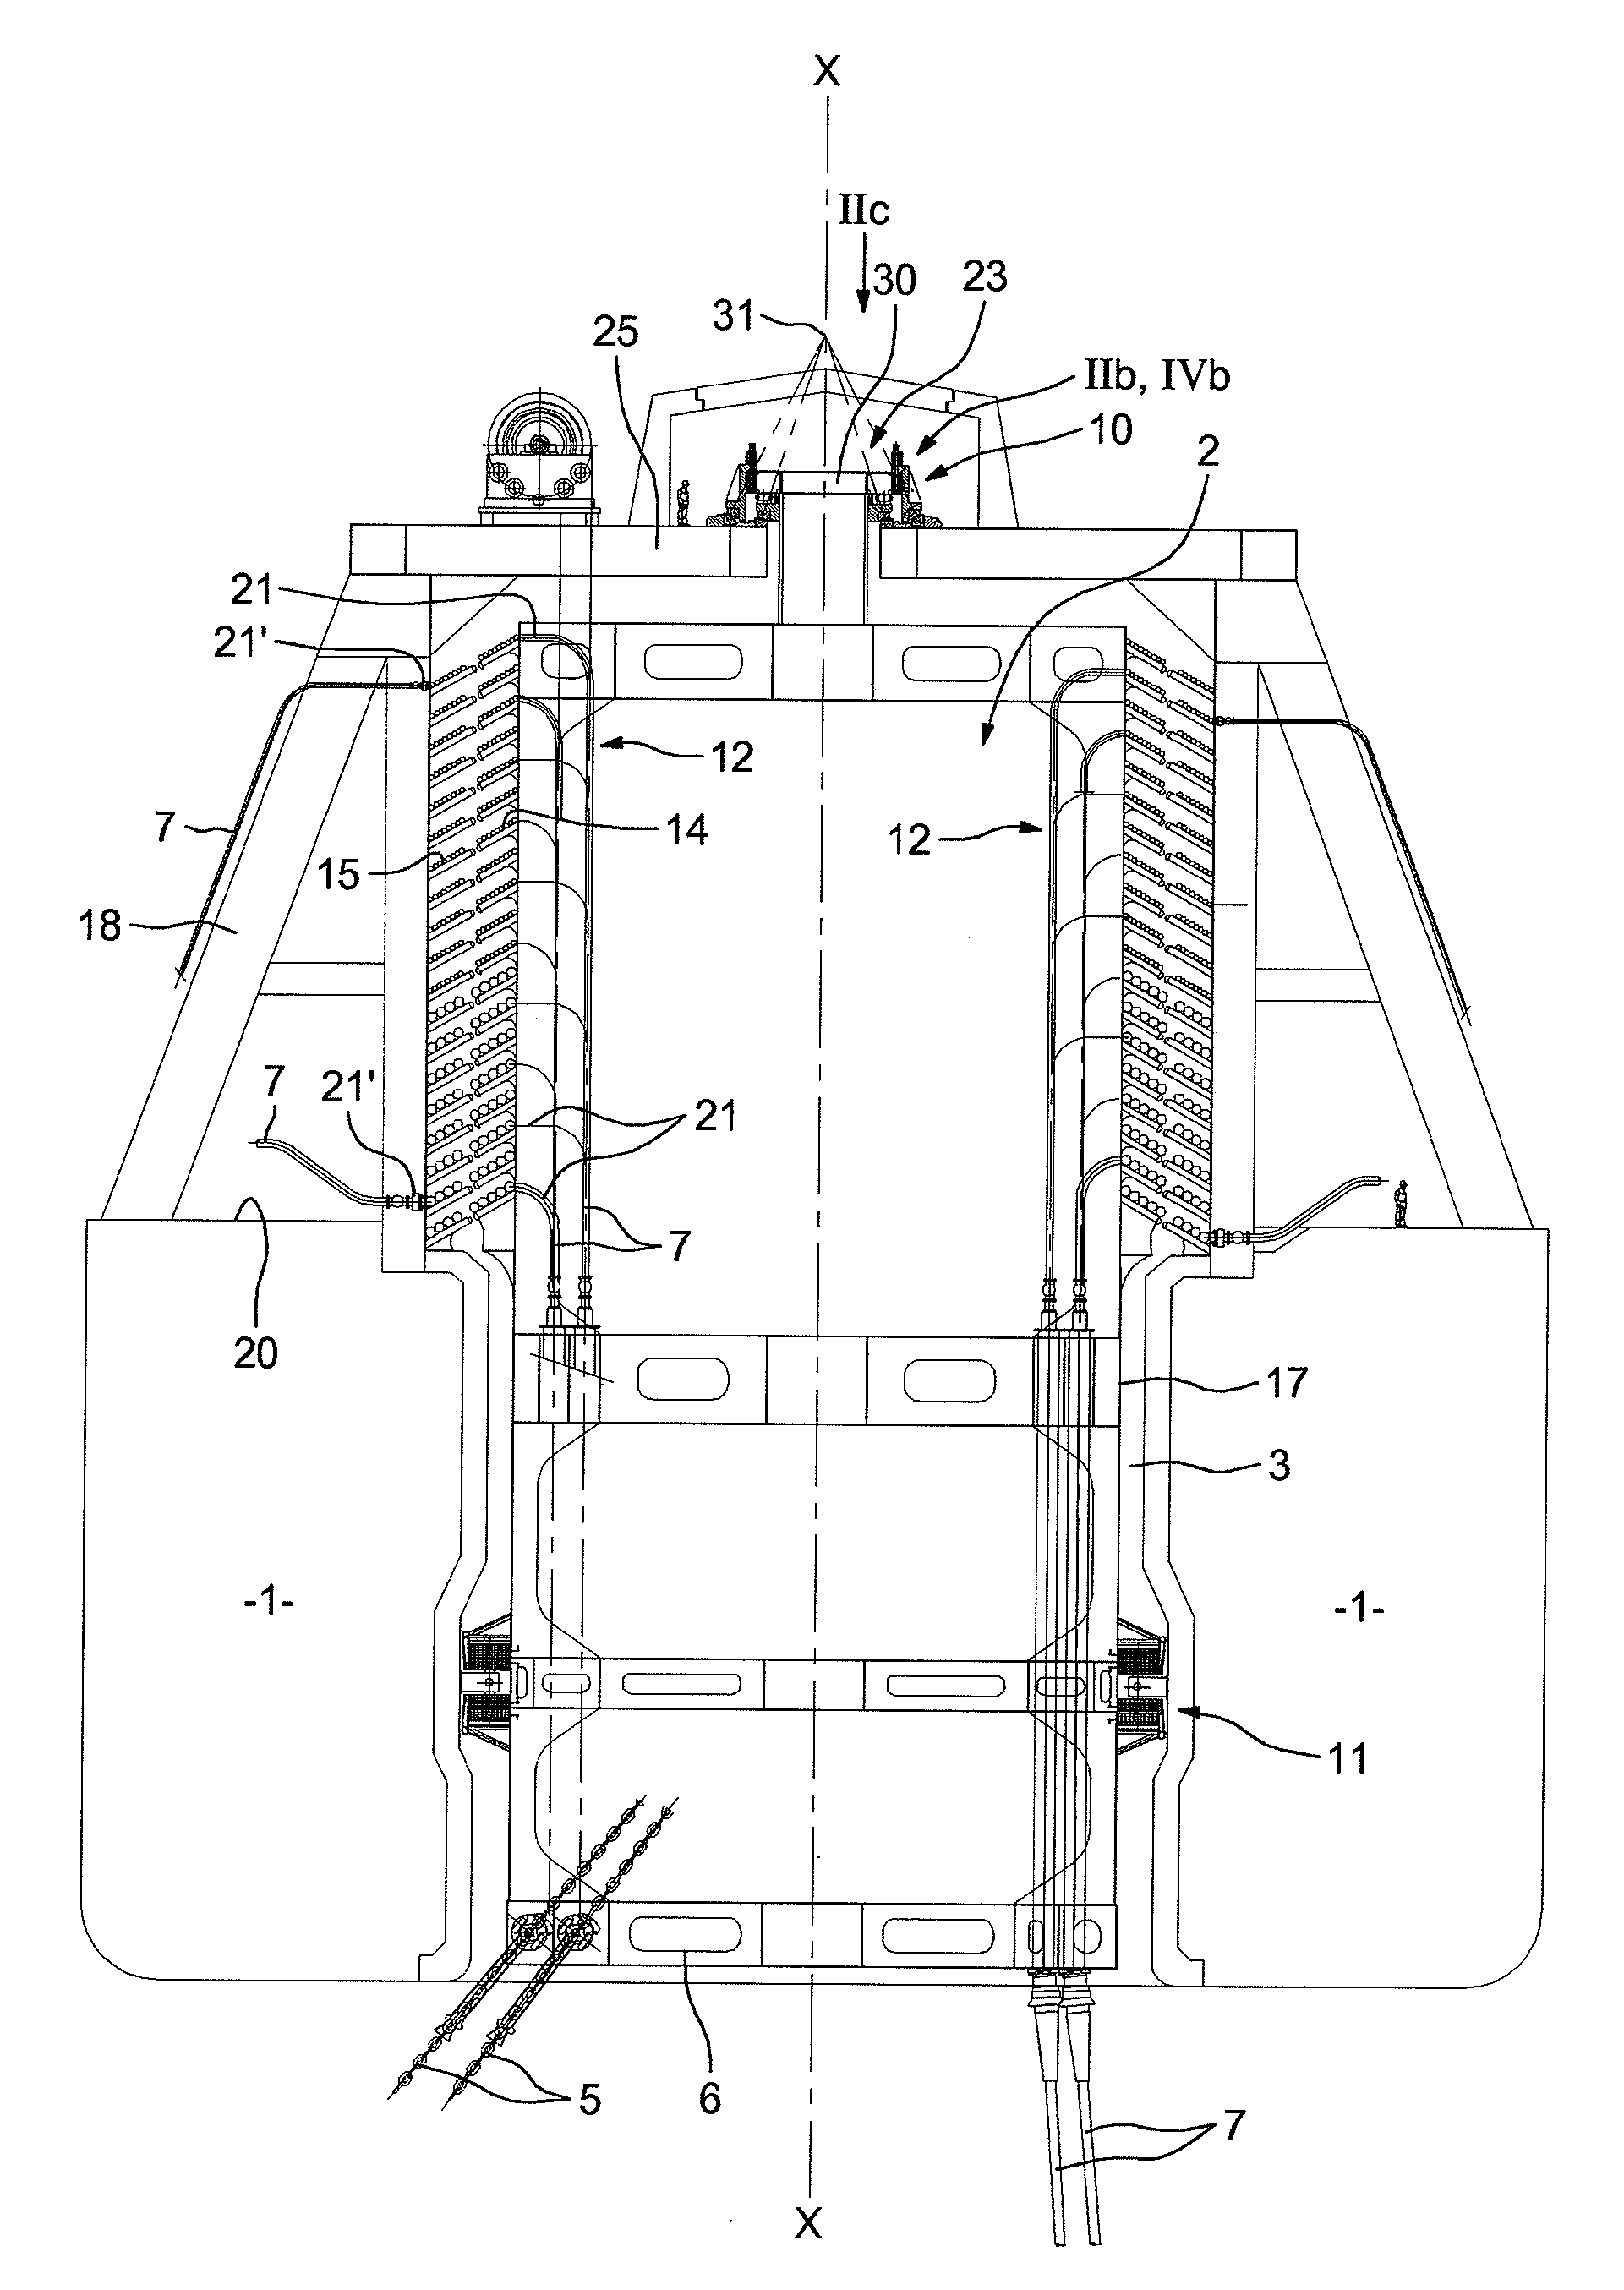 Facility in particular for producing and processing fluids, including a floating unit provided with a system for single-point mooring